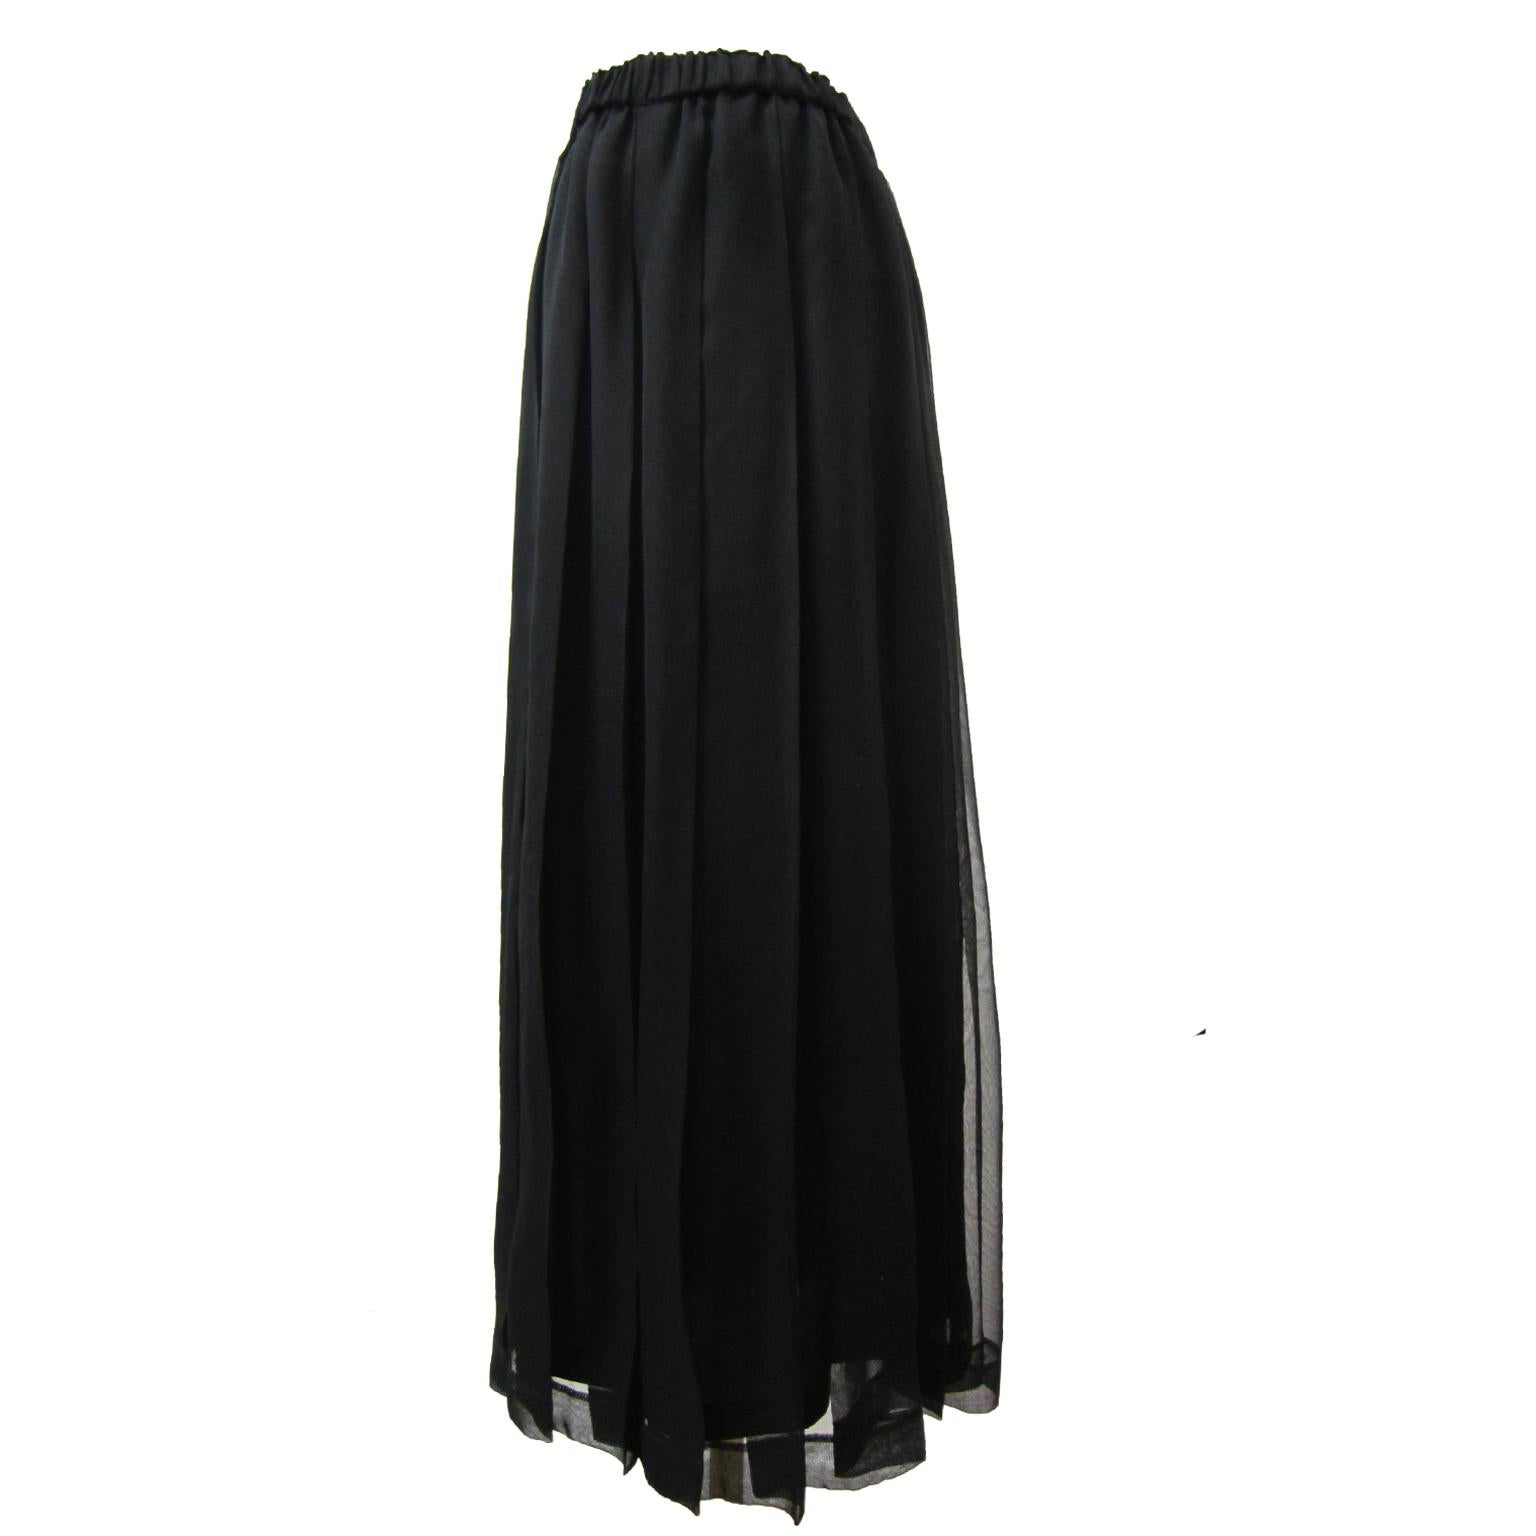 Comme des Garcons robe de chambre black layered sheer skirt from AD 1996.
This layered pleated skirt was made with two layers featuring elastic waist, max-length pleated sheer and an under layered design panel. 
Measurements : 
Length : 92 cm
Waist